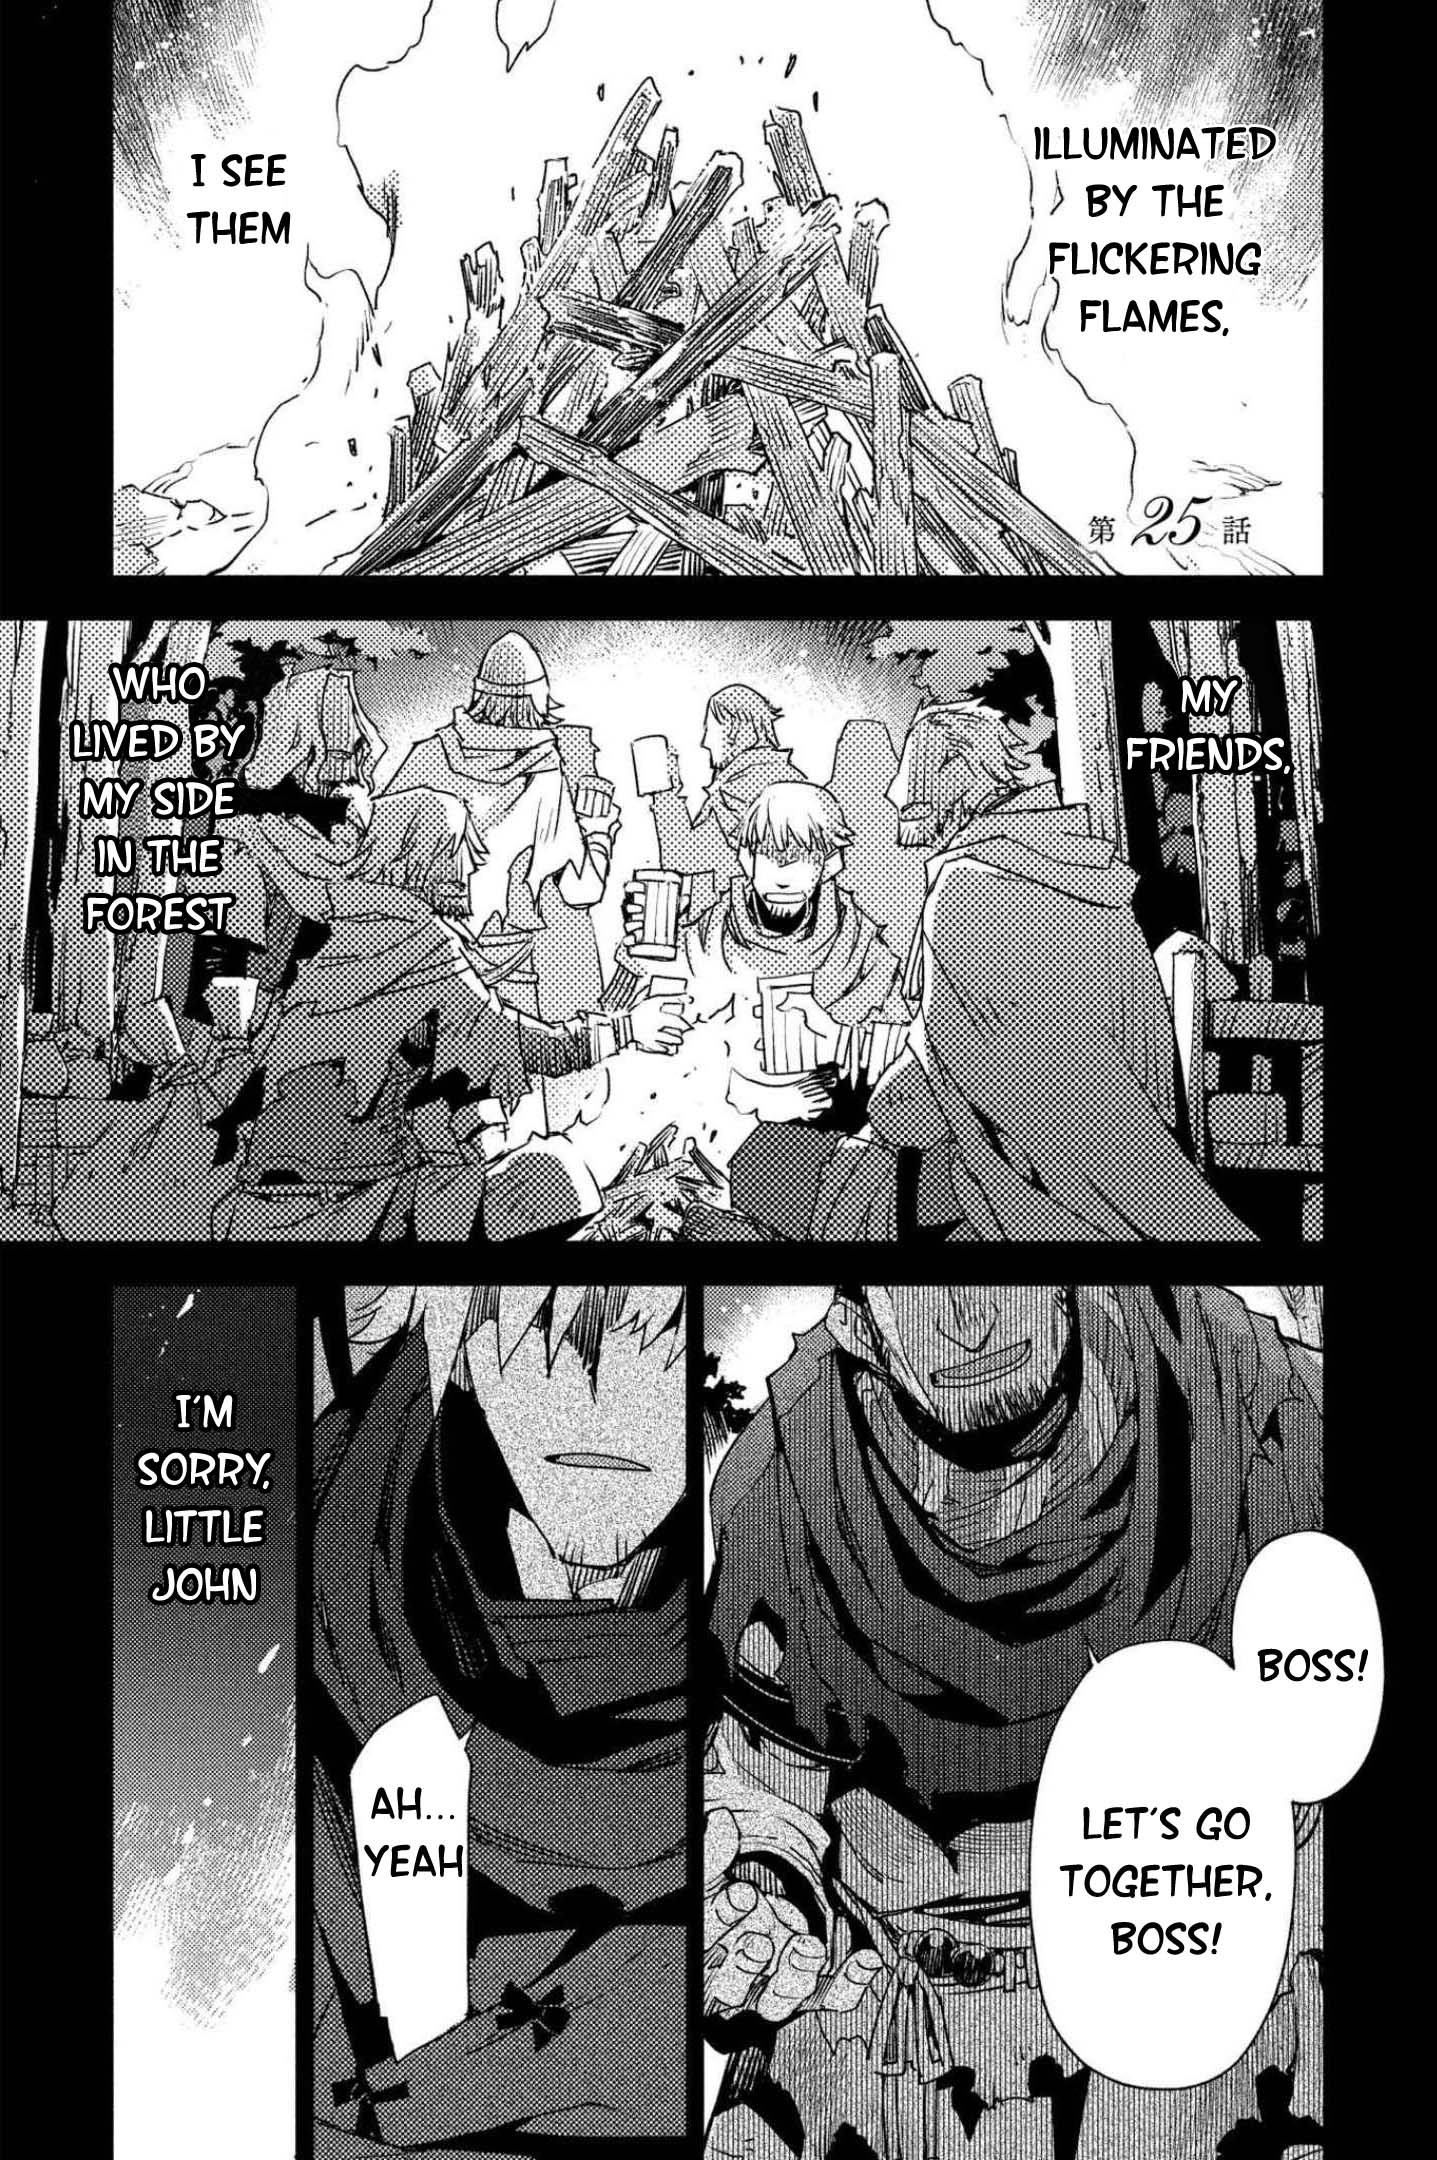 Fate/grand Order: Epic Of Remnant: Pseudo-Singularity Iv: The Forbidden Advent Garden, Salem - Heretical Salem Vol.4 Chapter 25: The Second Knot - 6 - Picture 1